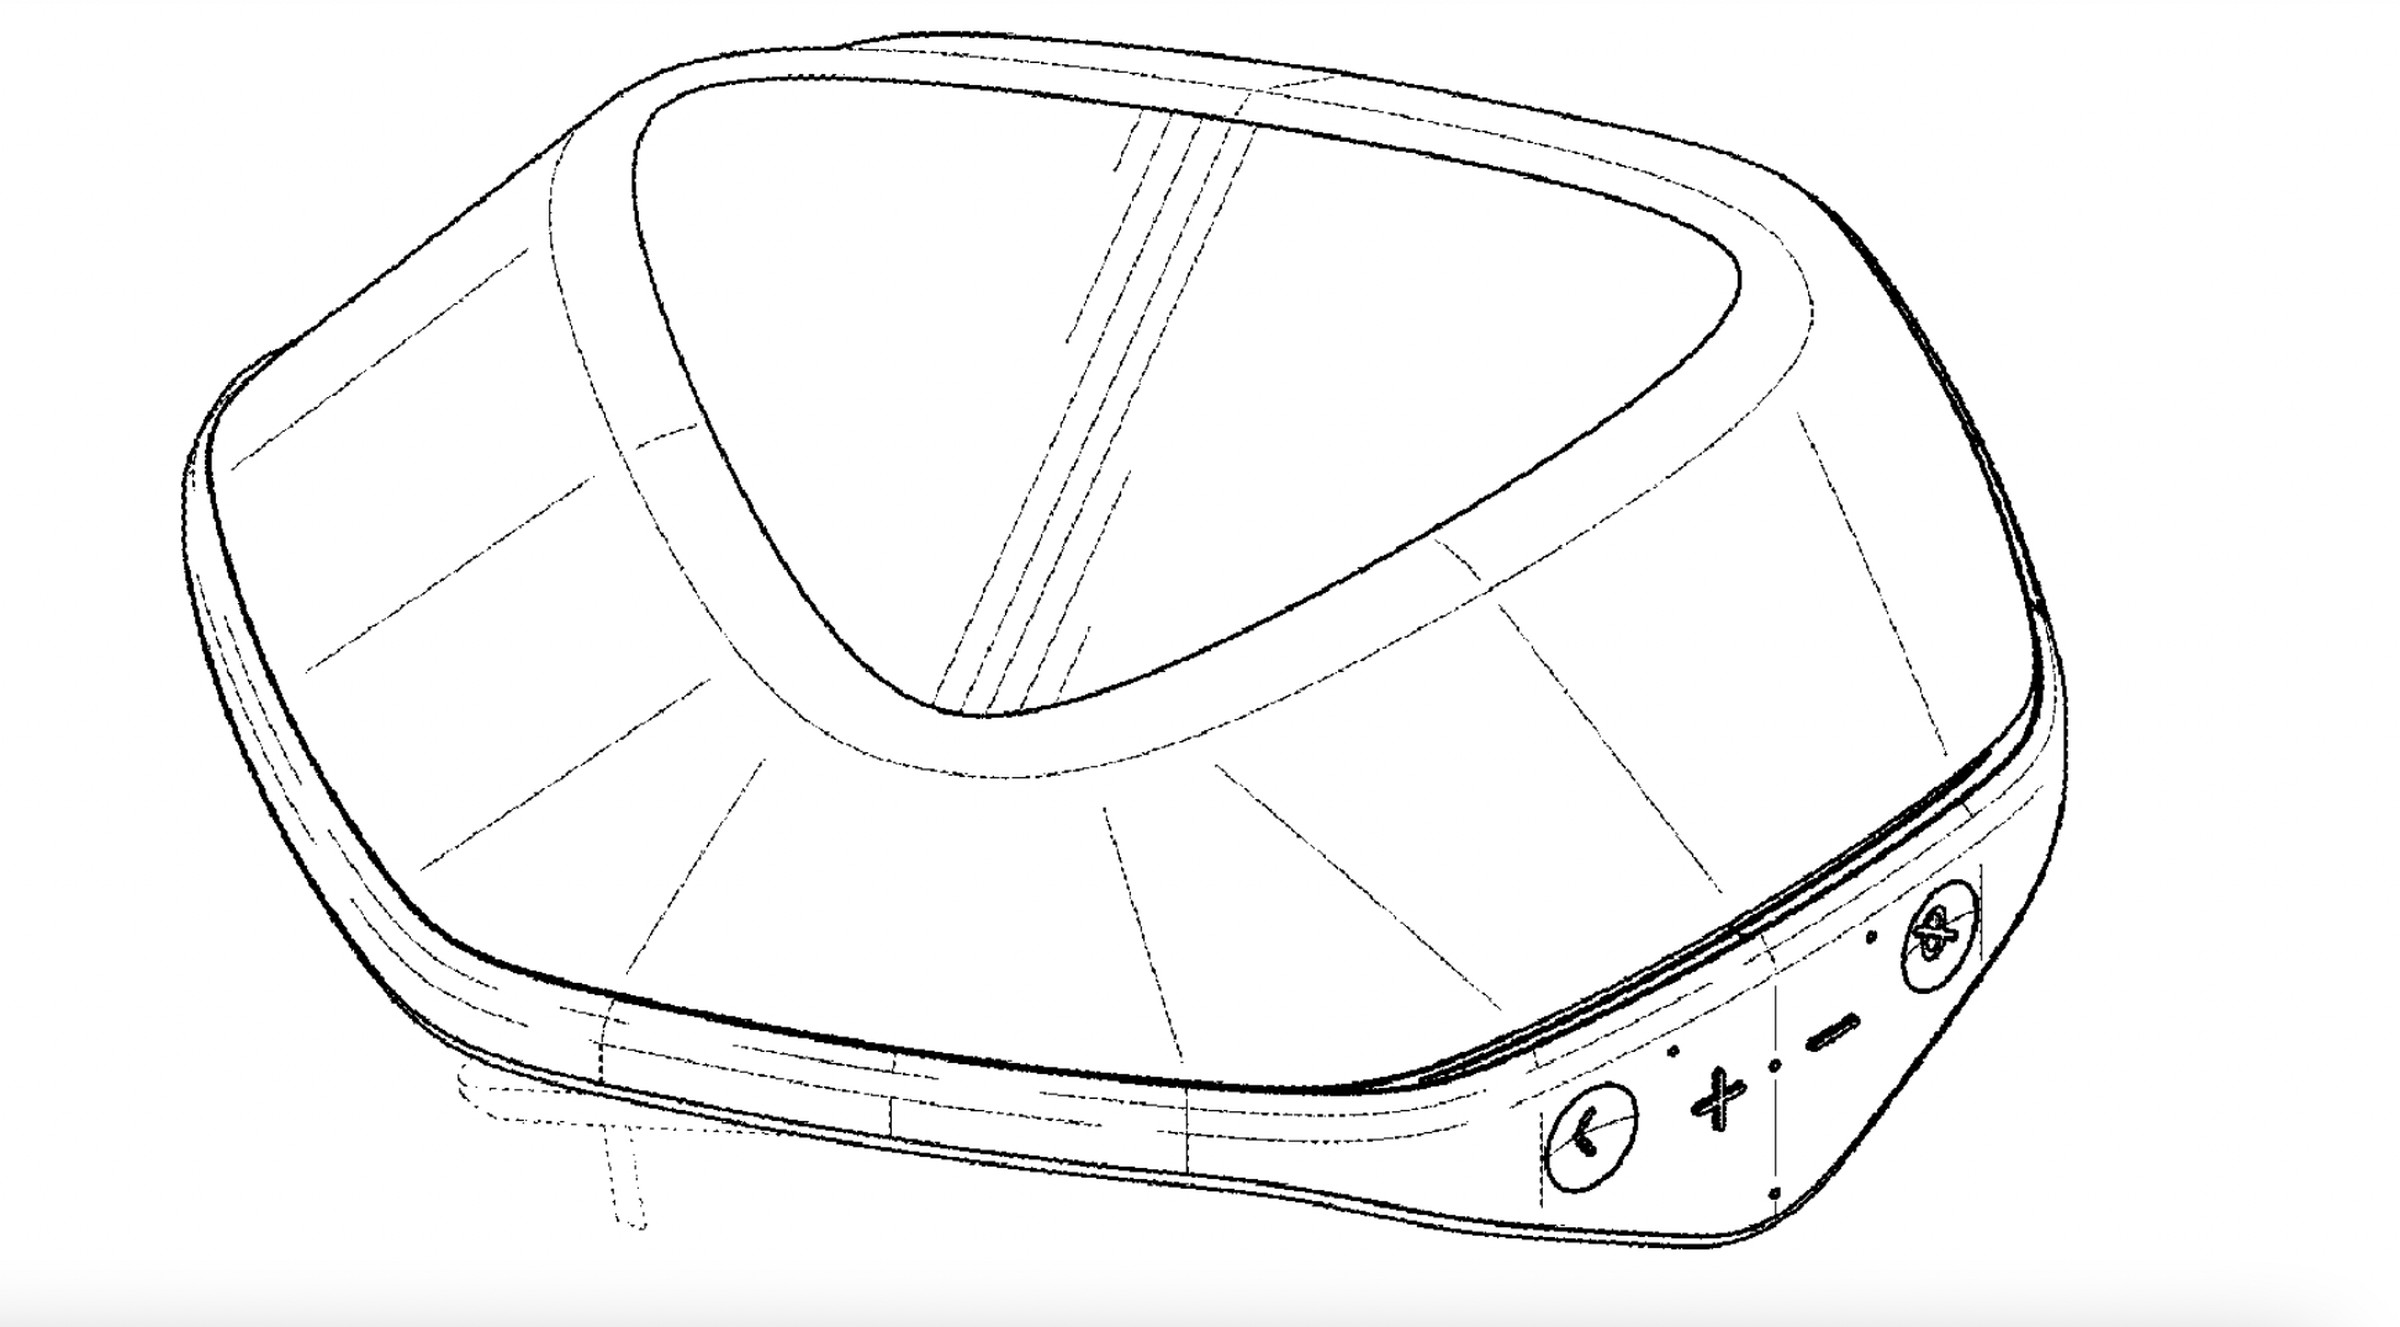 The smart speaker design kind of looks like a bedpan (sorry, not sorry).